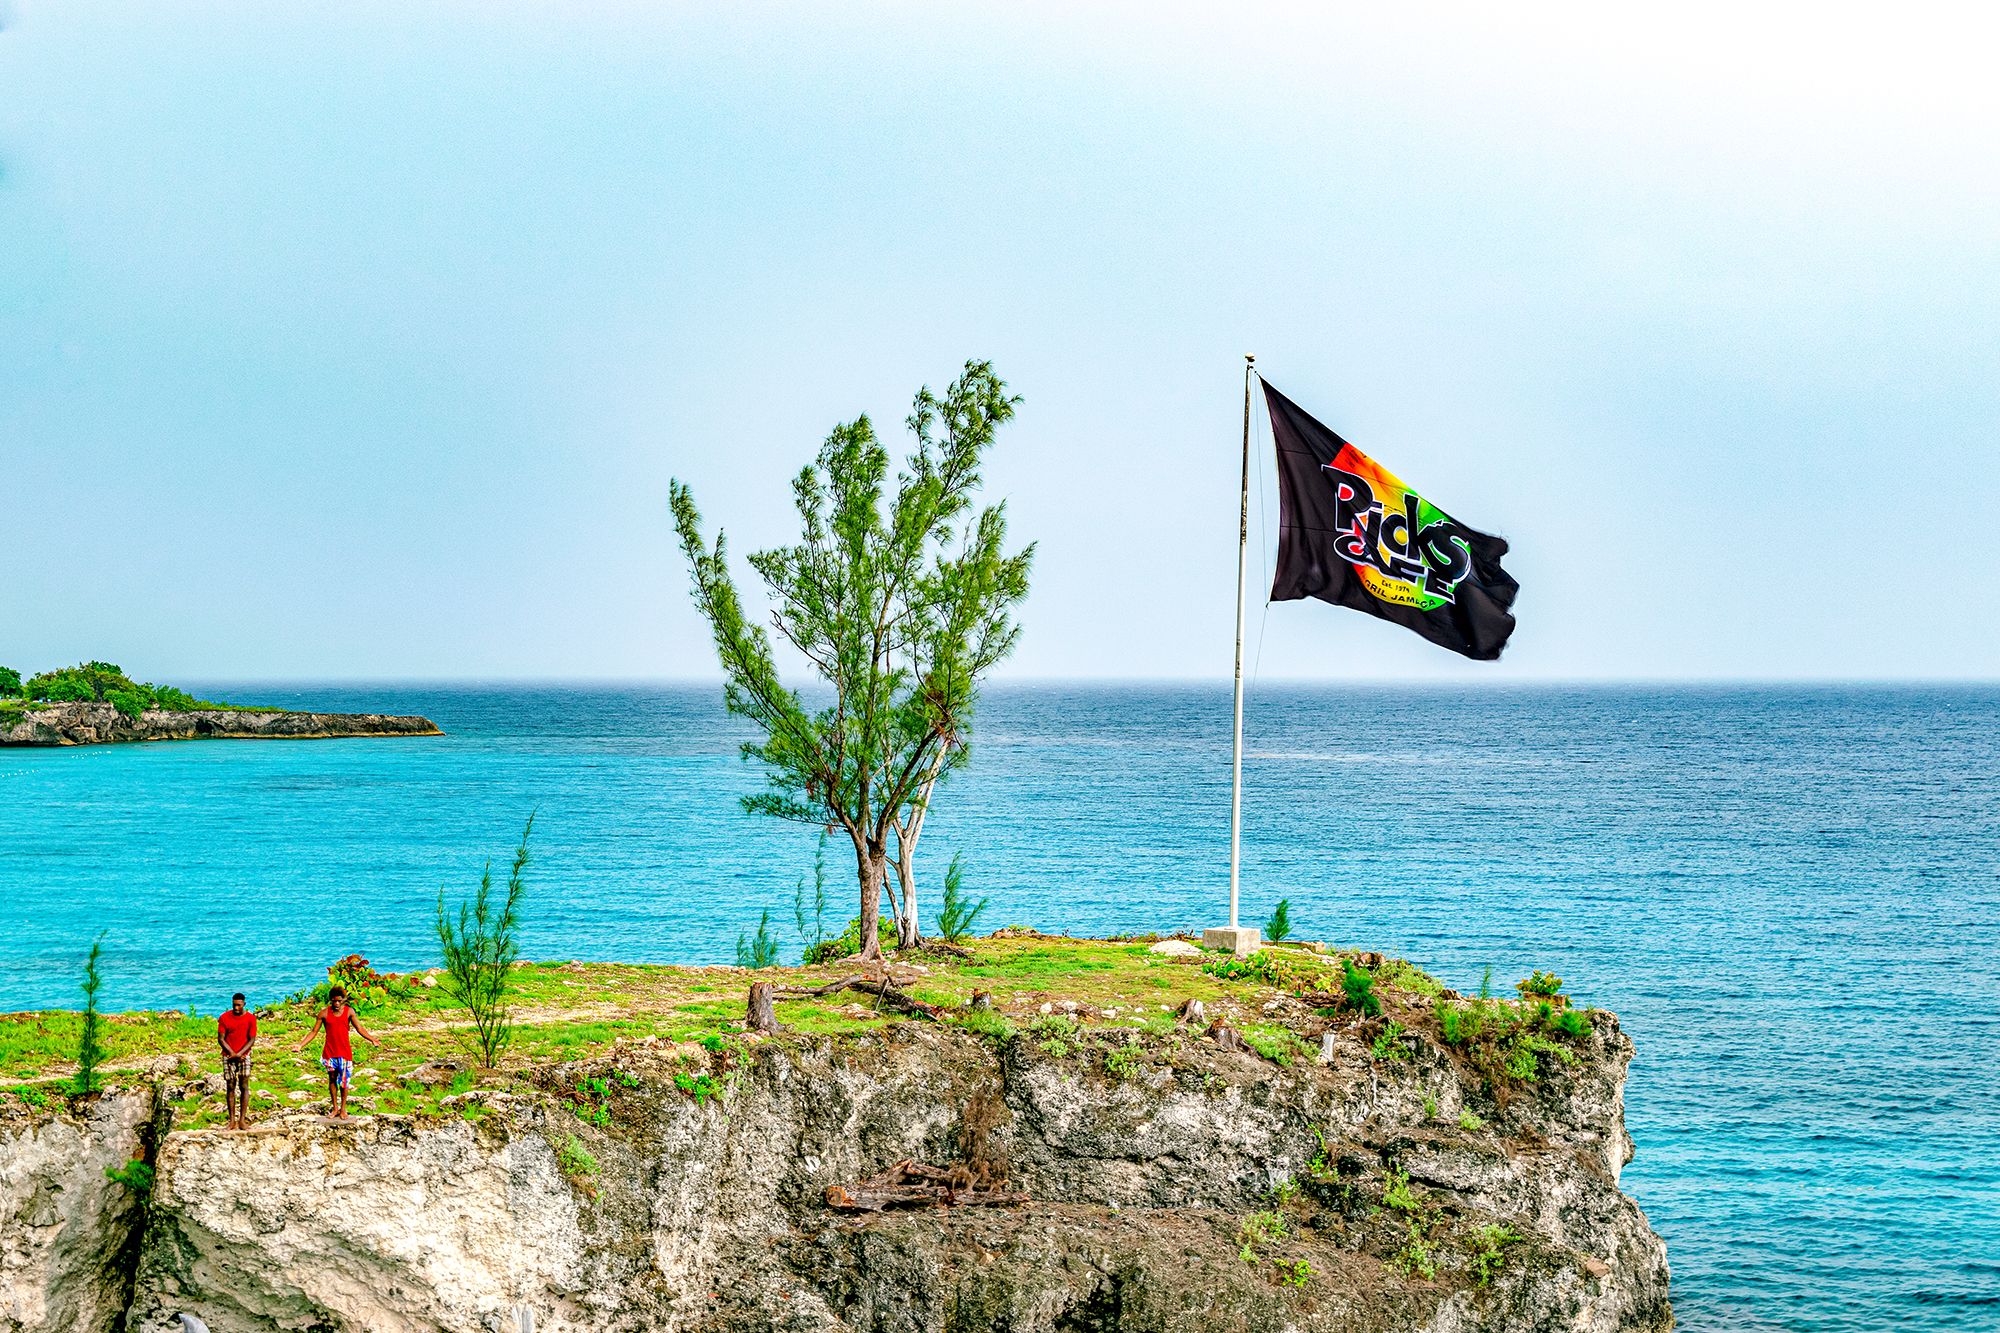 Rick’s Café In Jamaica: Enchanting Sunsets, Daring Cliff Jumps & Great Vibes